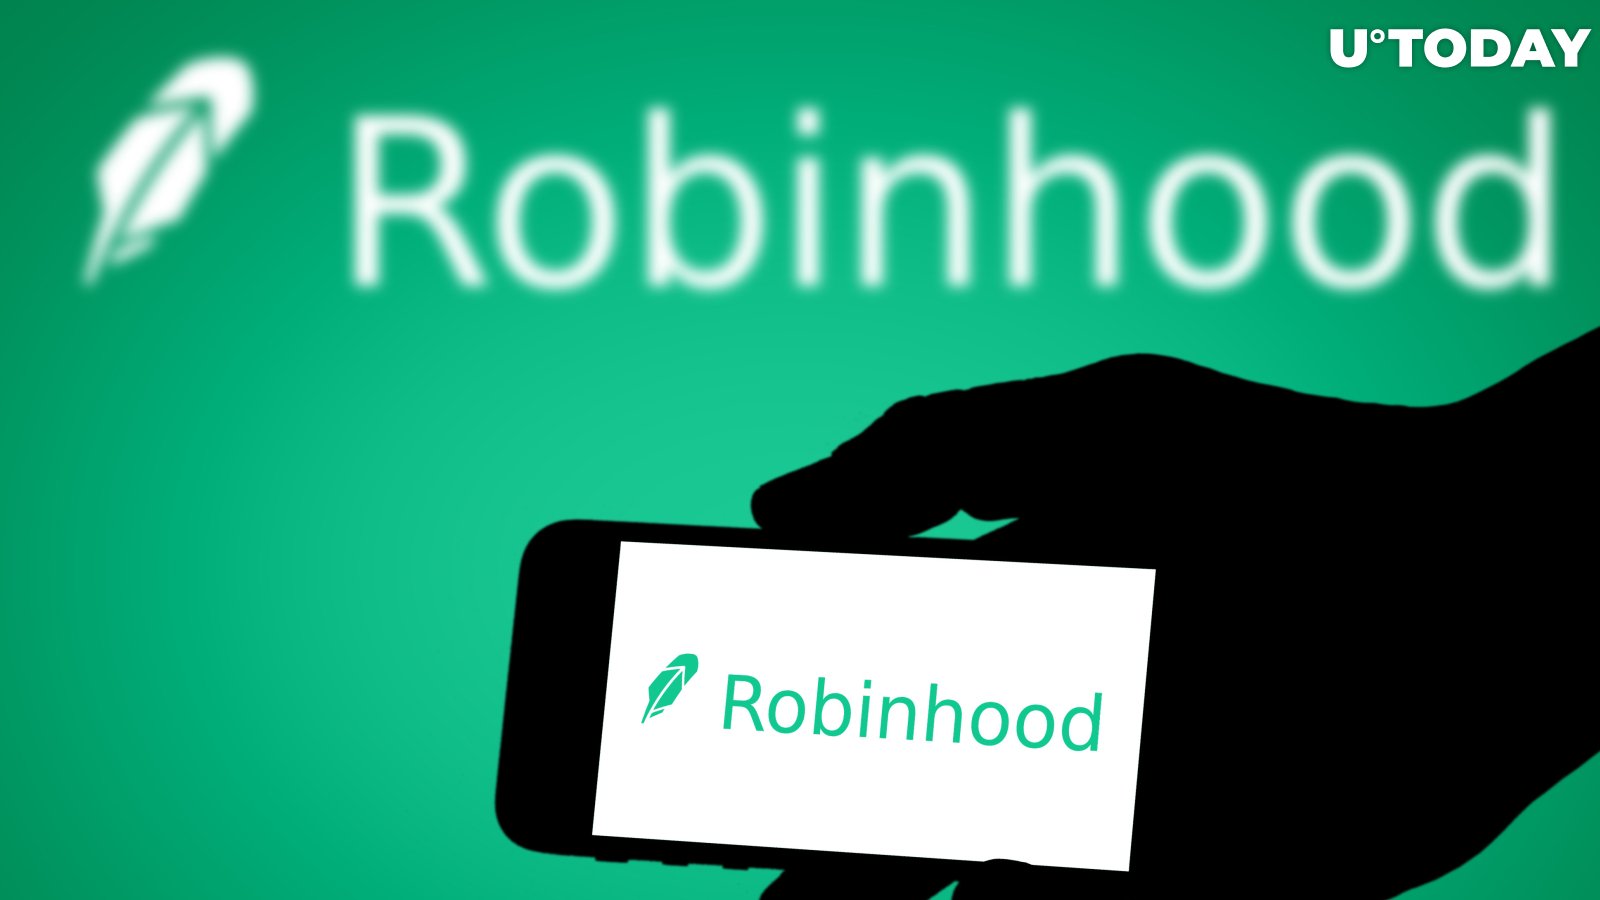 Robinhood Files for IPO, Says Dogecoin Accounts for "Substantial Portion" of Its Crypto-Related Revenue